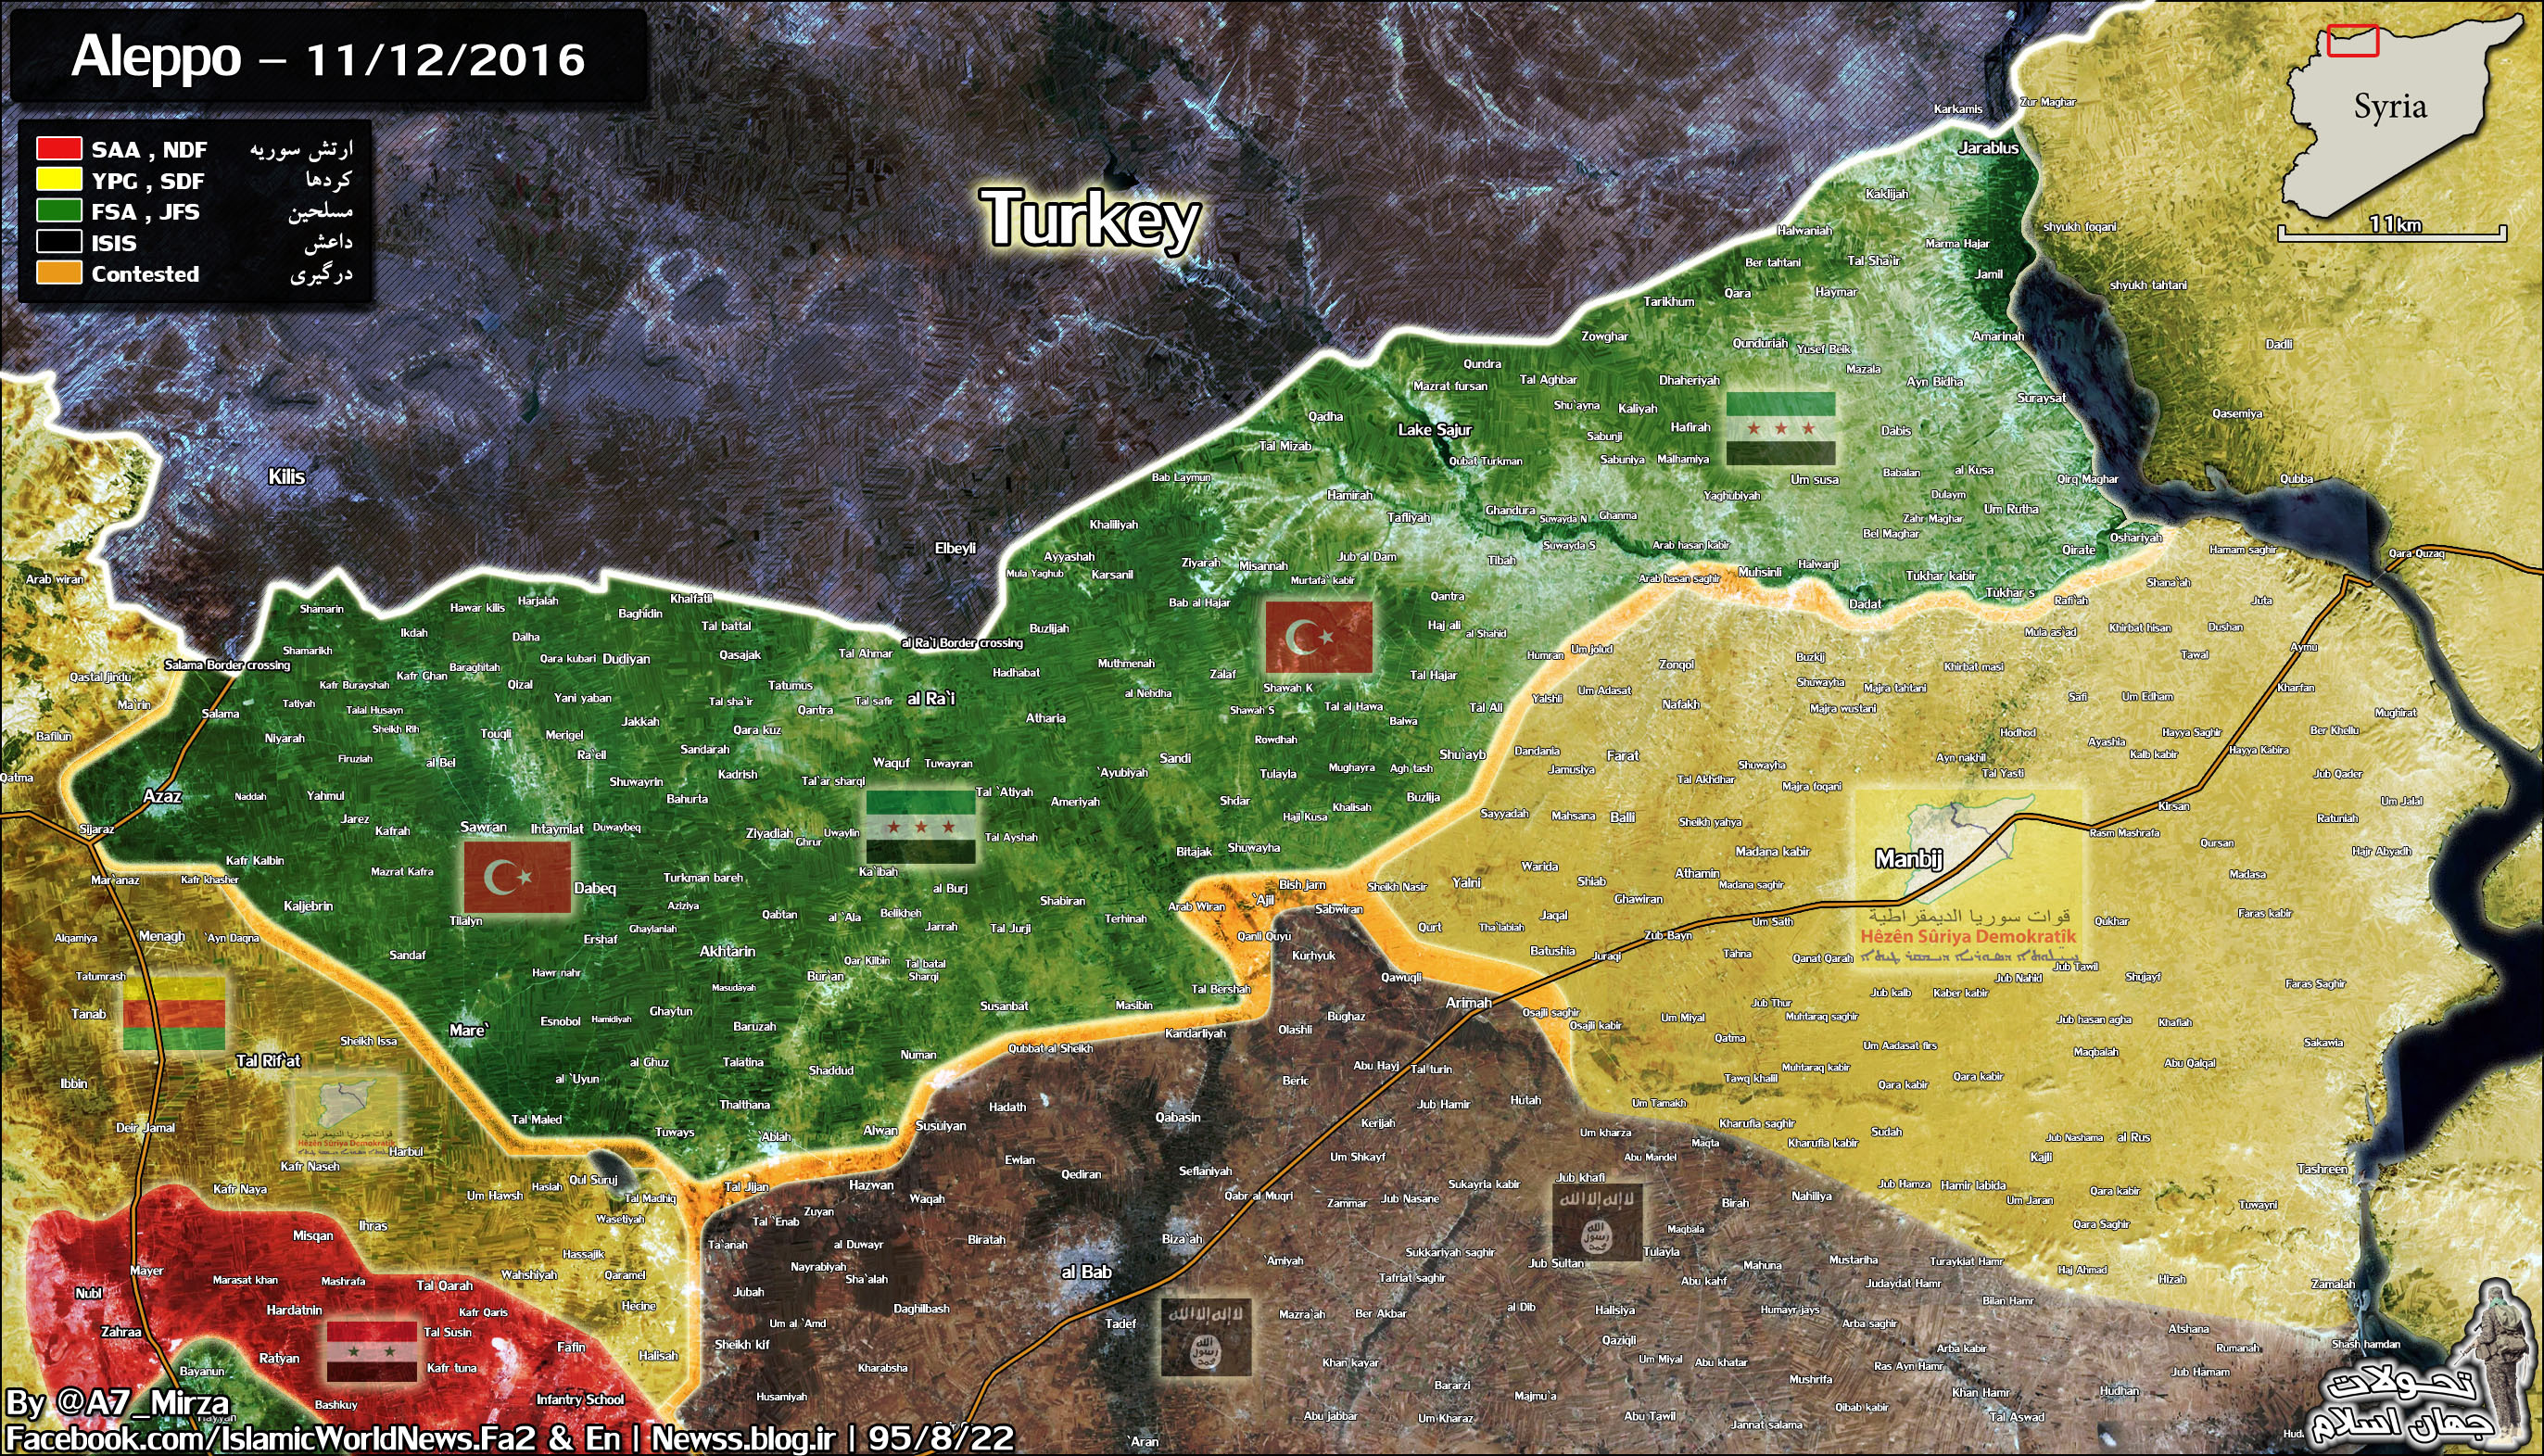 Turkey Supplies Its Proxies in Northern Aleppo with MANPADs (Photo, Map)